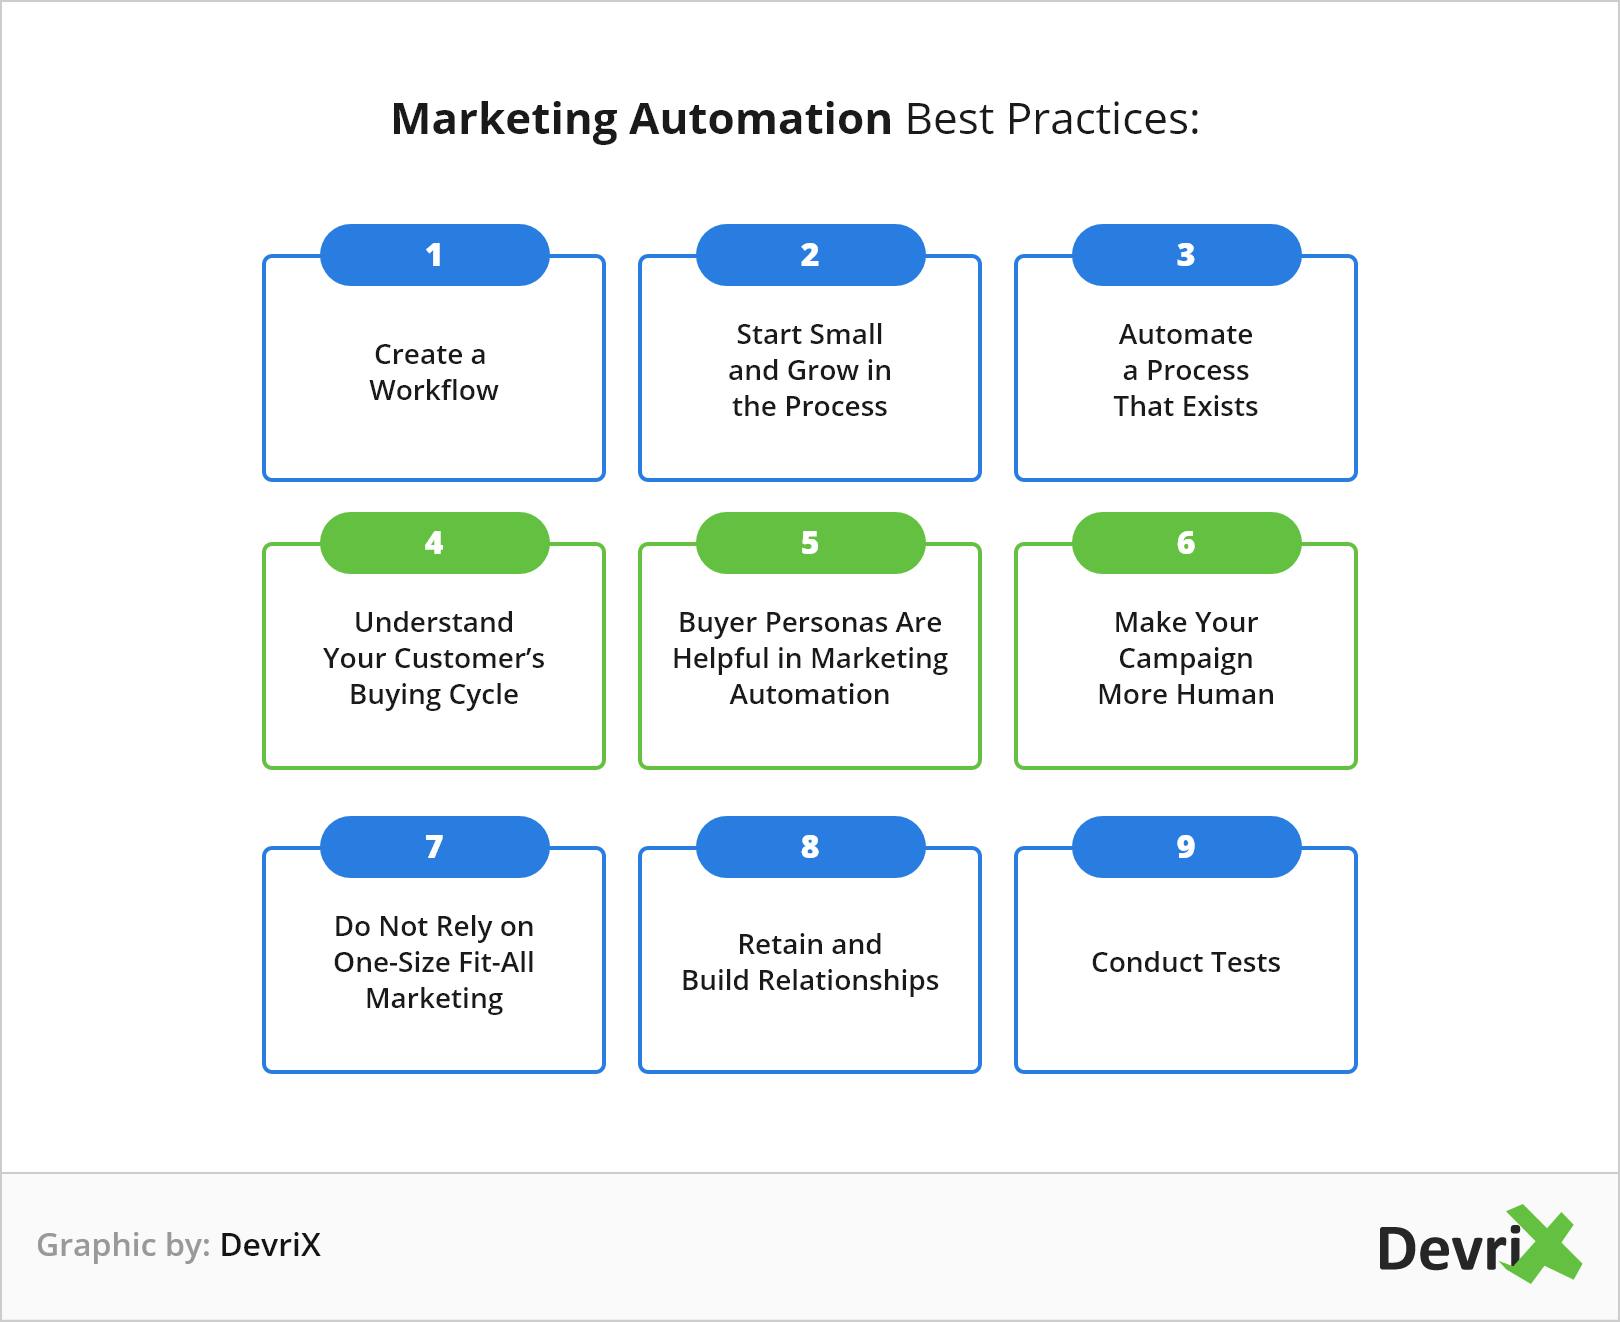 b2b marketing automation best practices.png